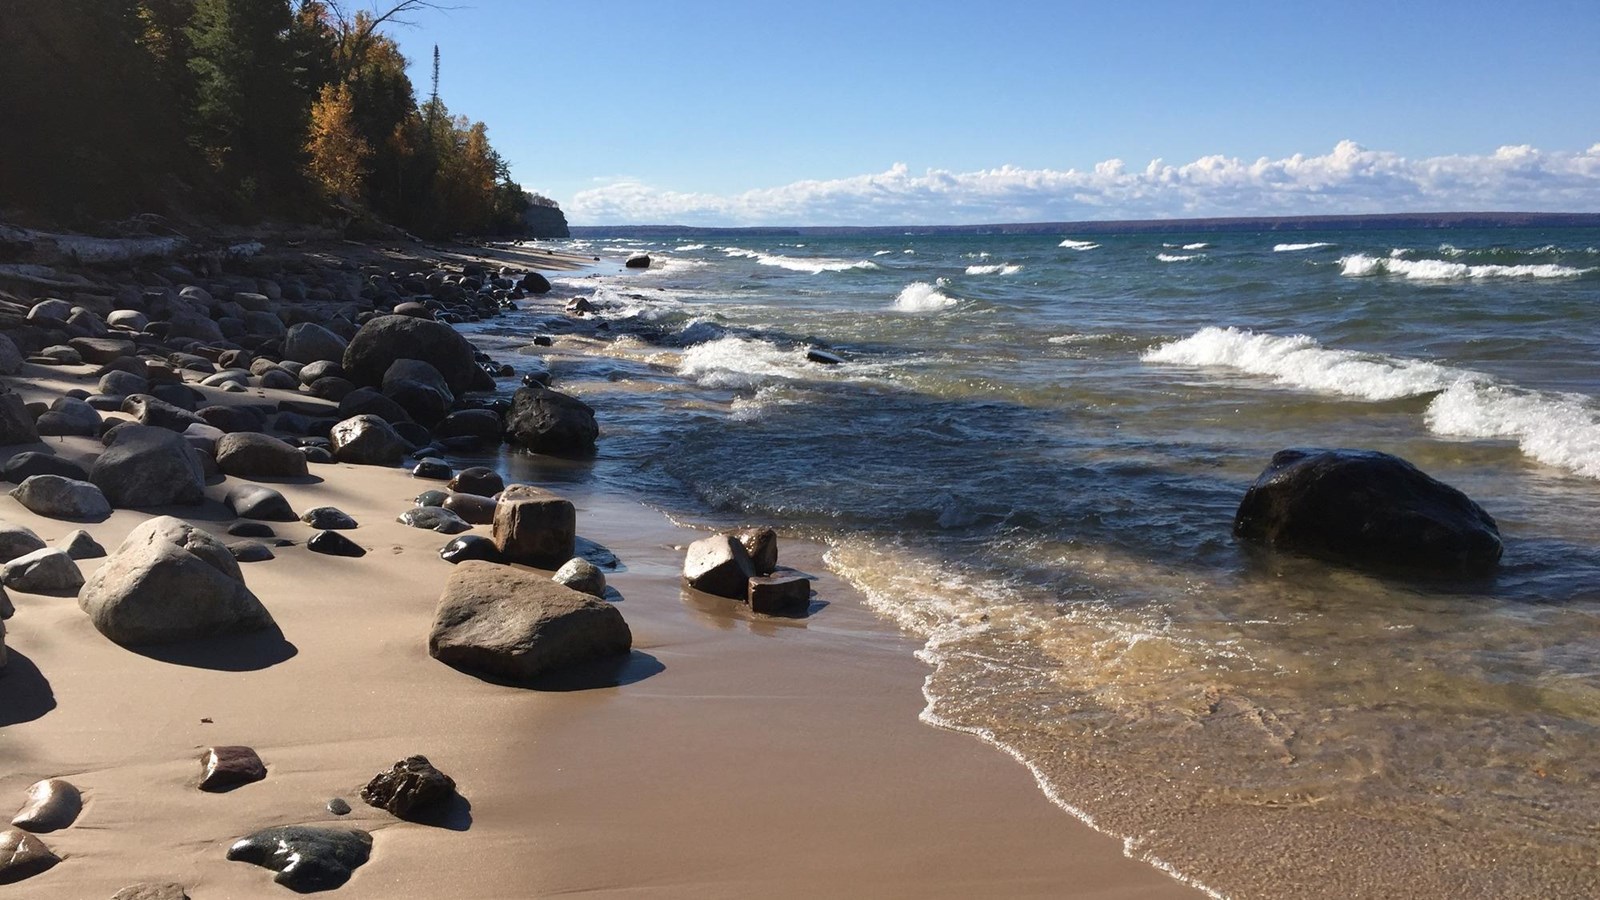 small and medium sized boulders and rocks on the beach and in the water.